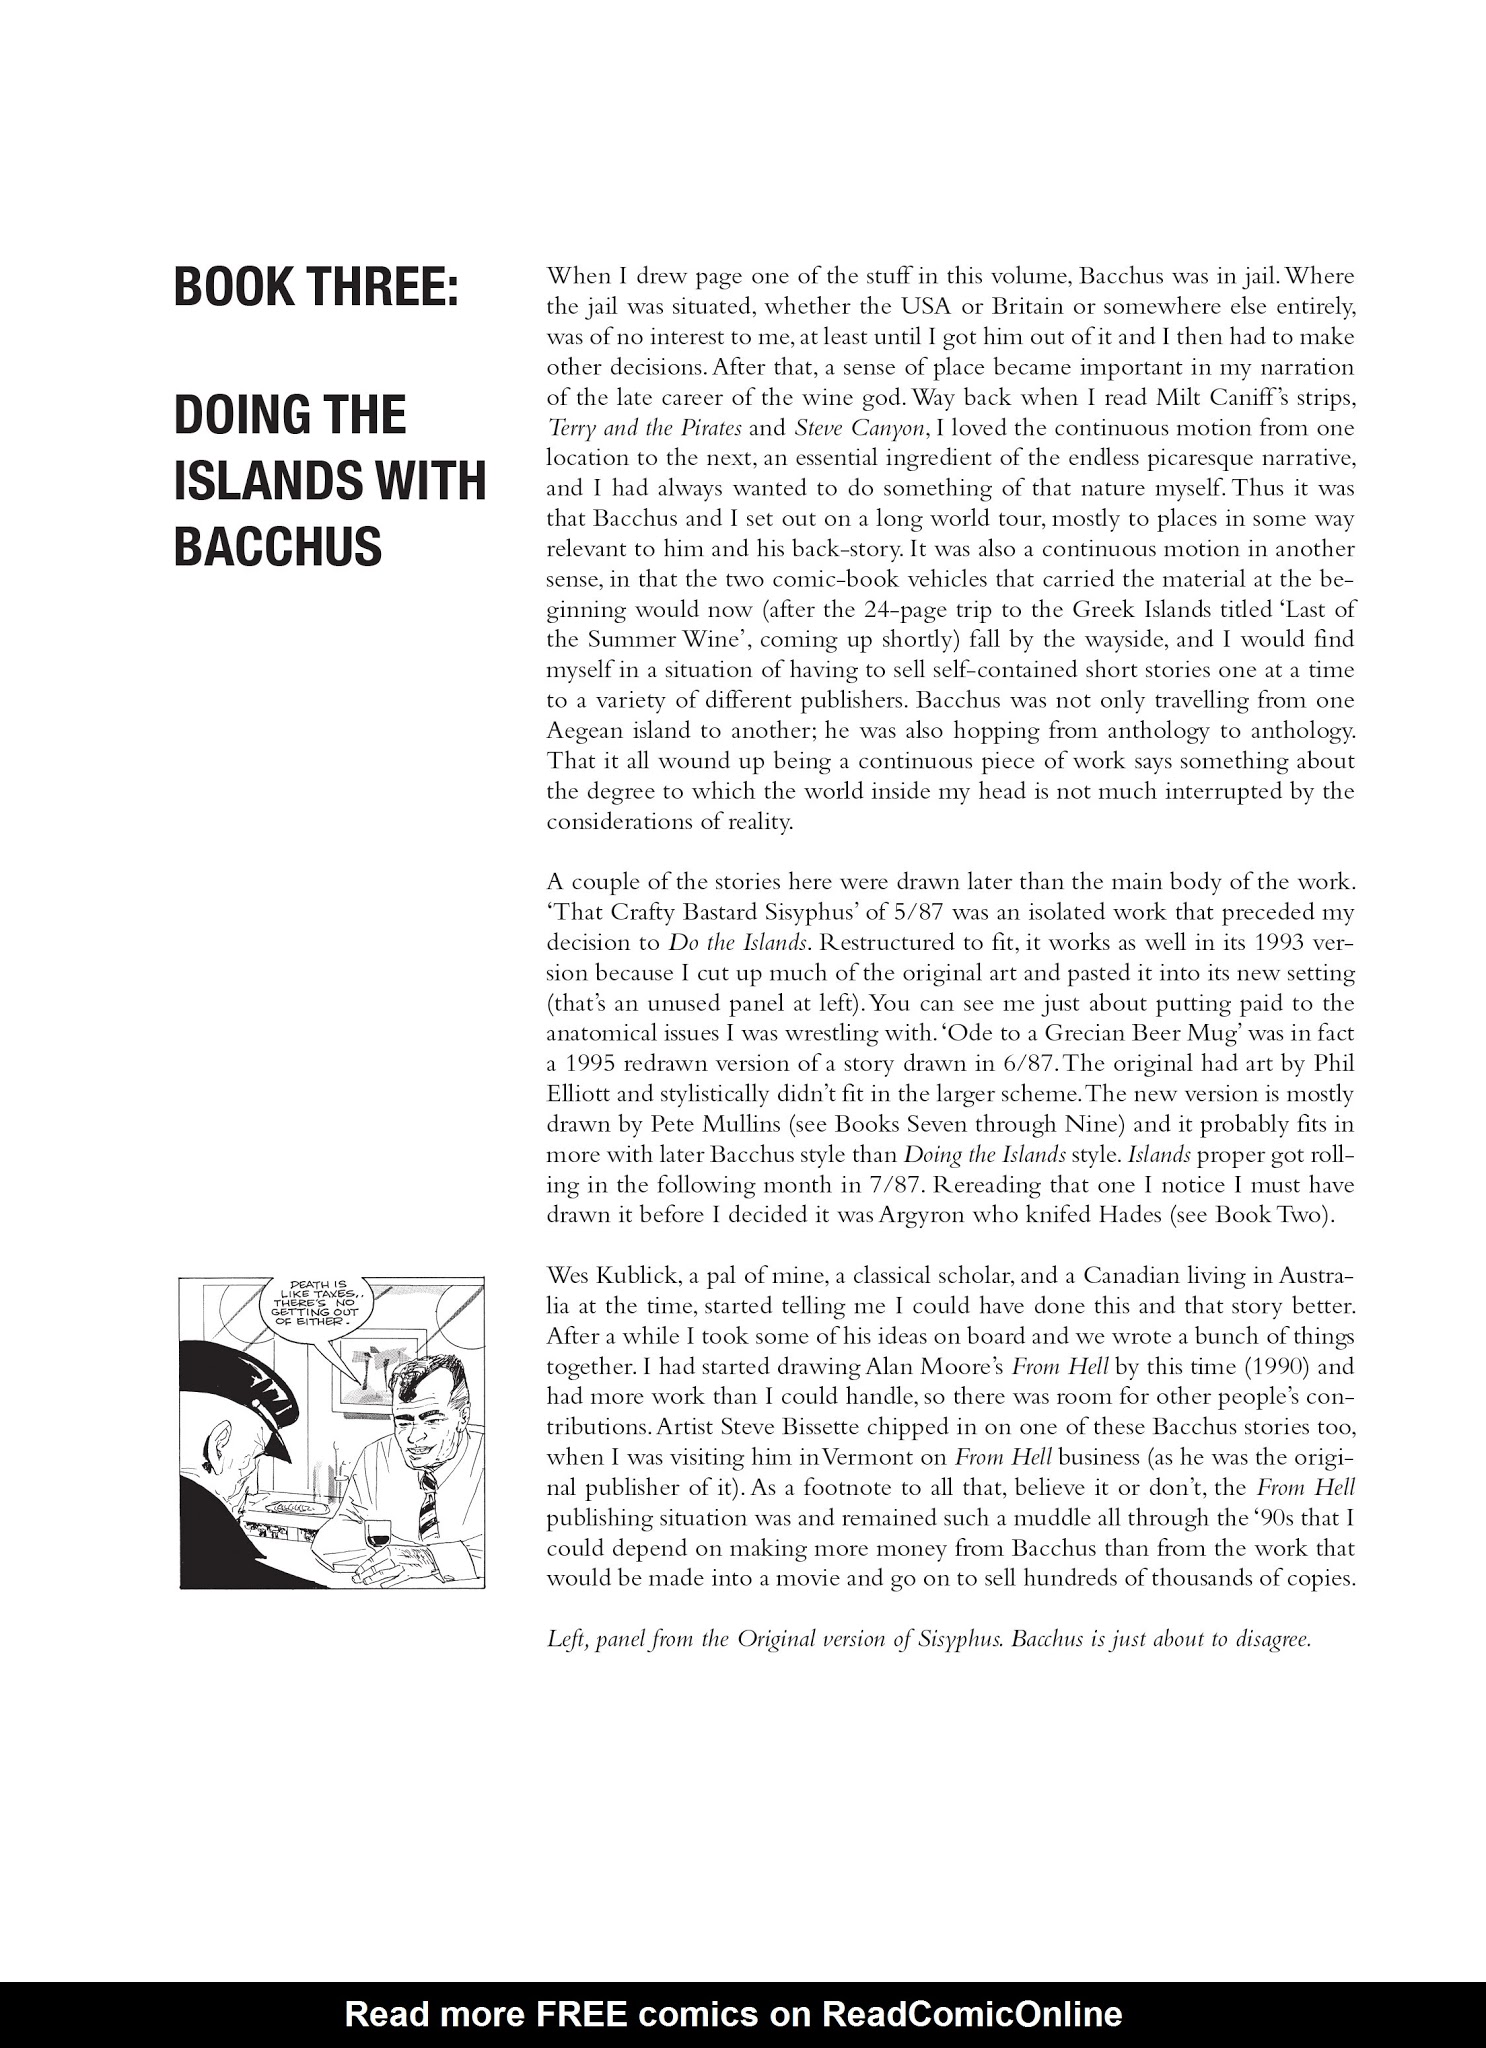 Read online Eddie Campbell's Bacchus comic -  Issue # TPB 2 - 2